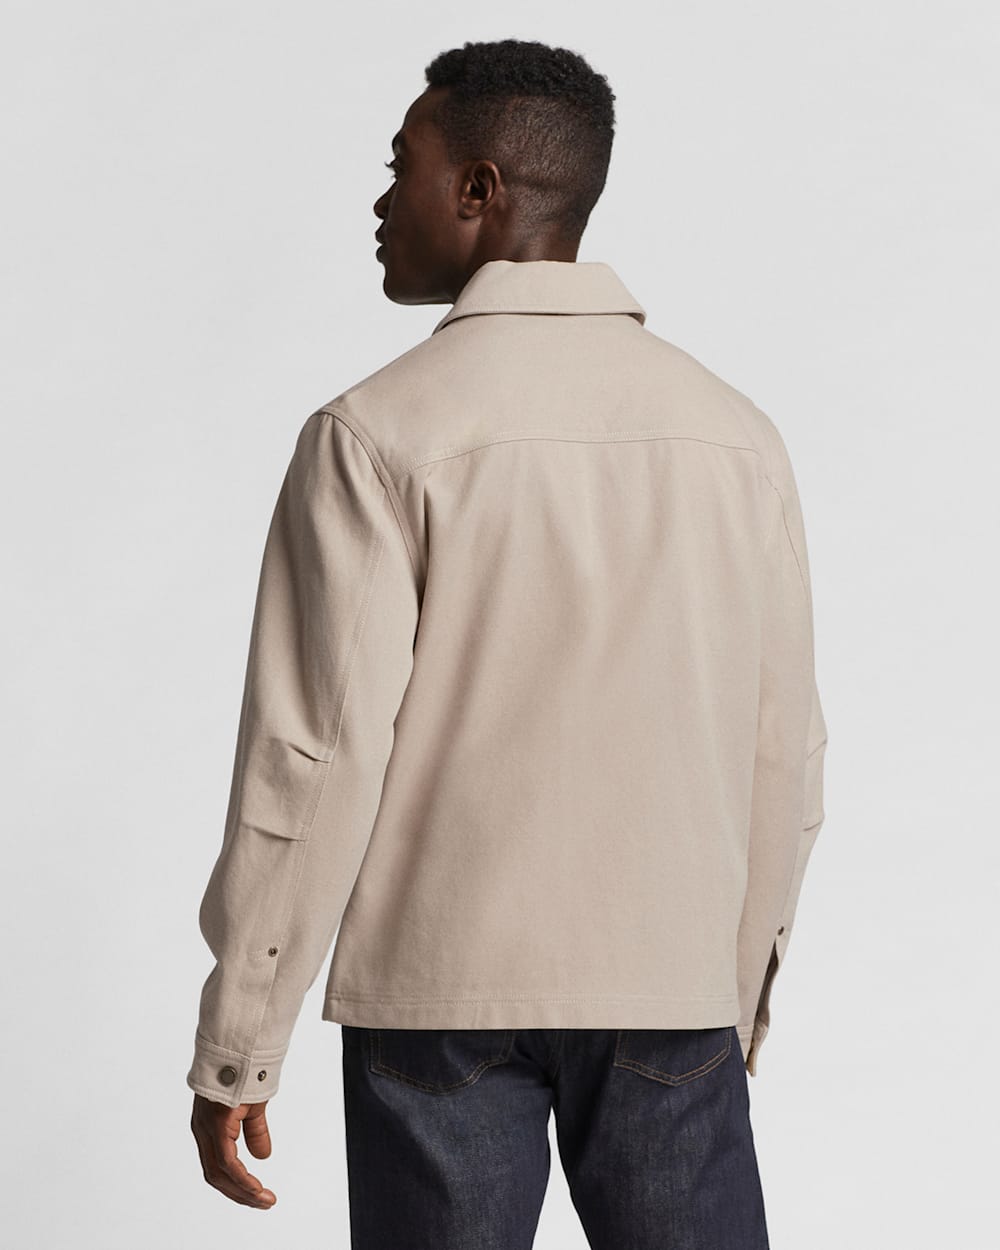 ALTERNATE VIEW OF MEN'S ADAMS CANVAS MECHANIC'S JACKET IN TAUPE image number 2